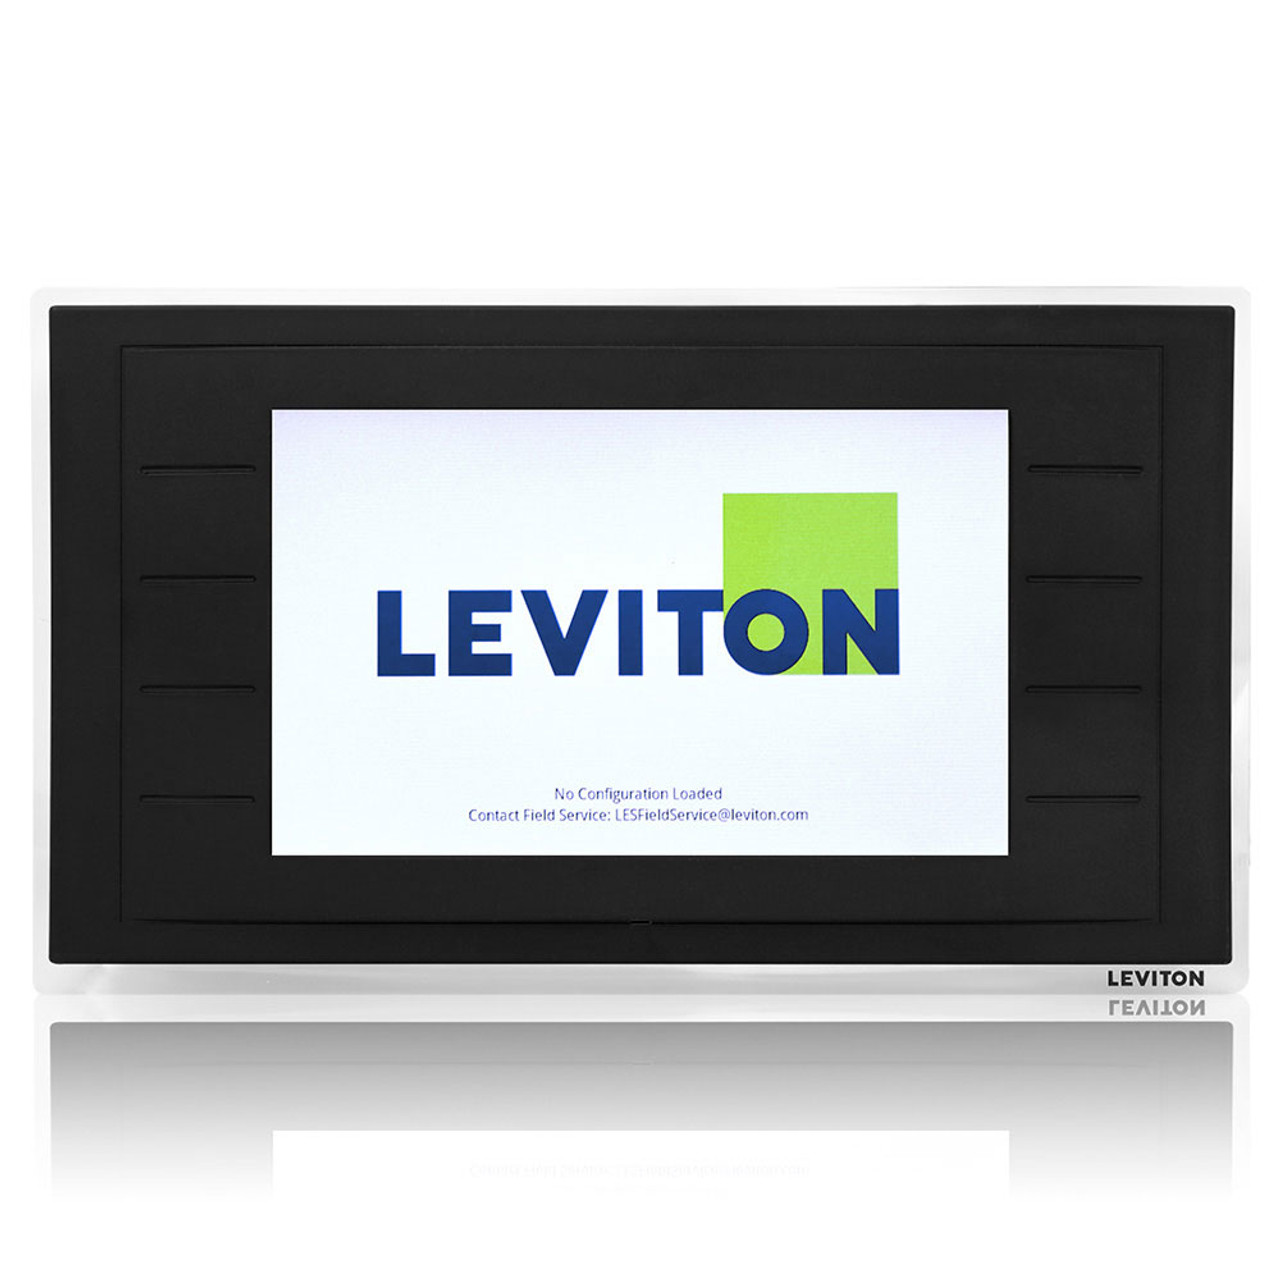 Leviton TS007 Sapphire, Touch Screen, Dimmer Switch, Room Controller, LED Controller, Lighting Control